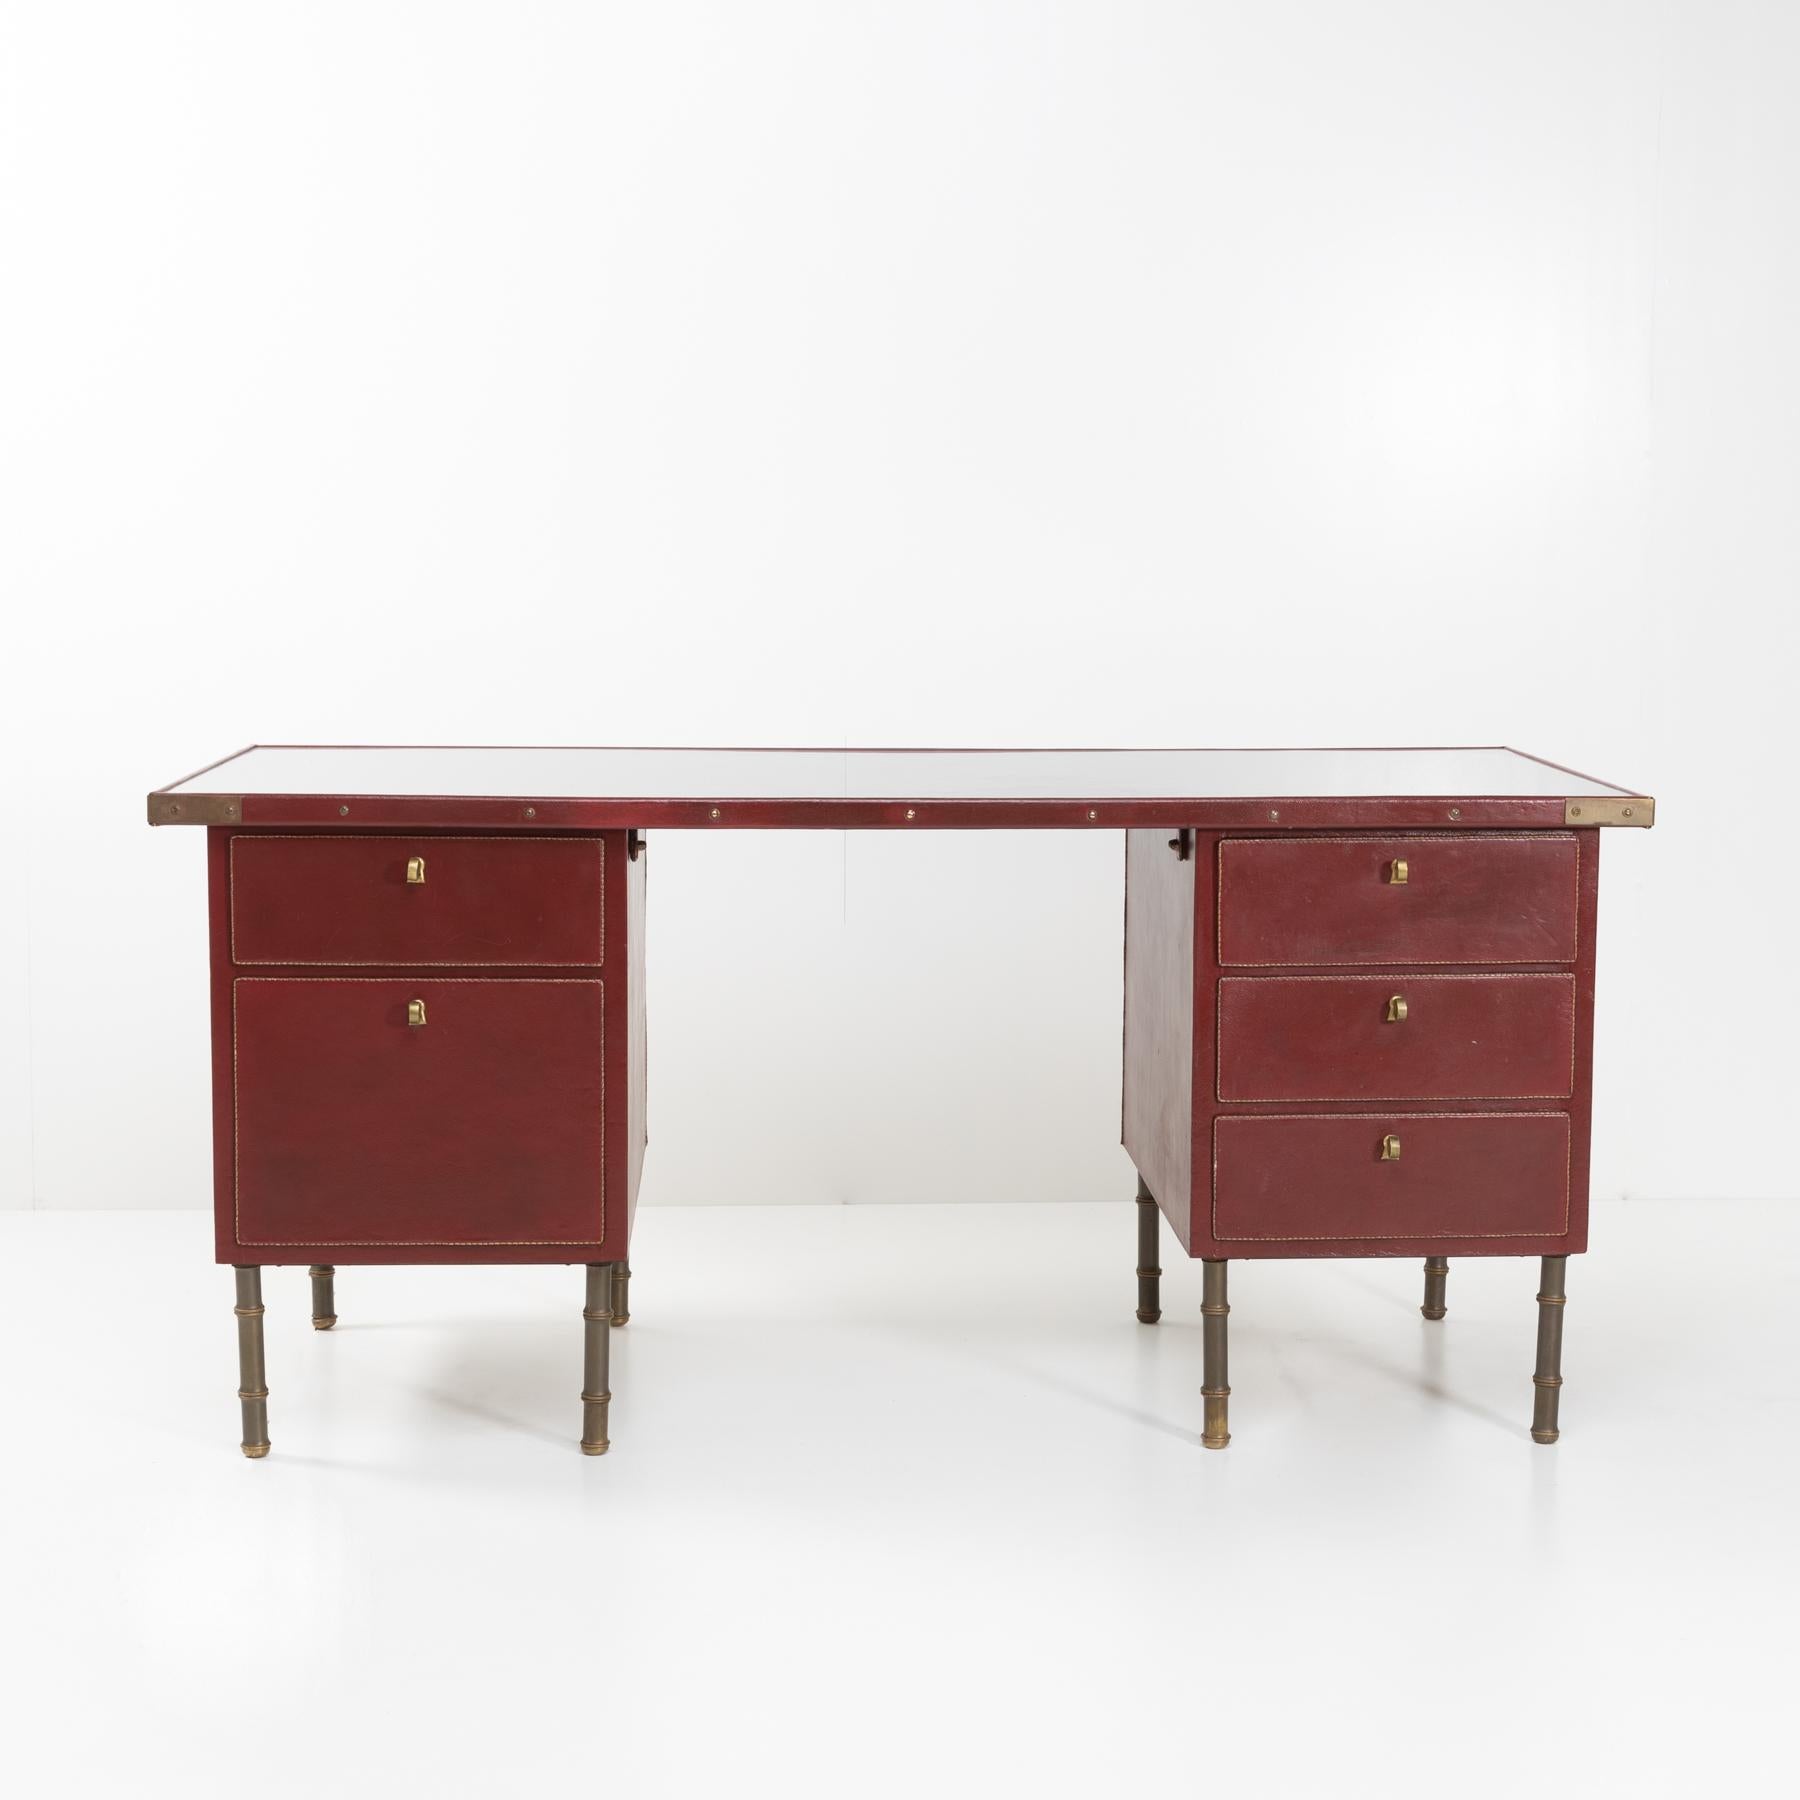 Mid-Century Modern Coffered Desk with Its Matching Chair in the Shape of a Horse Saddle